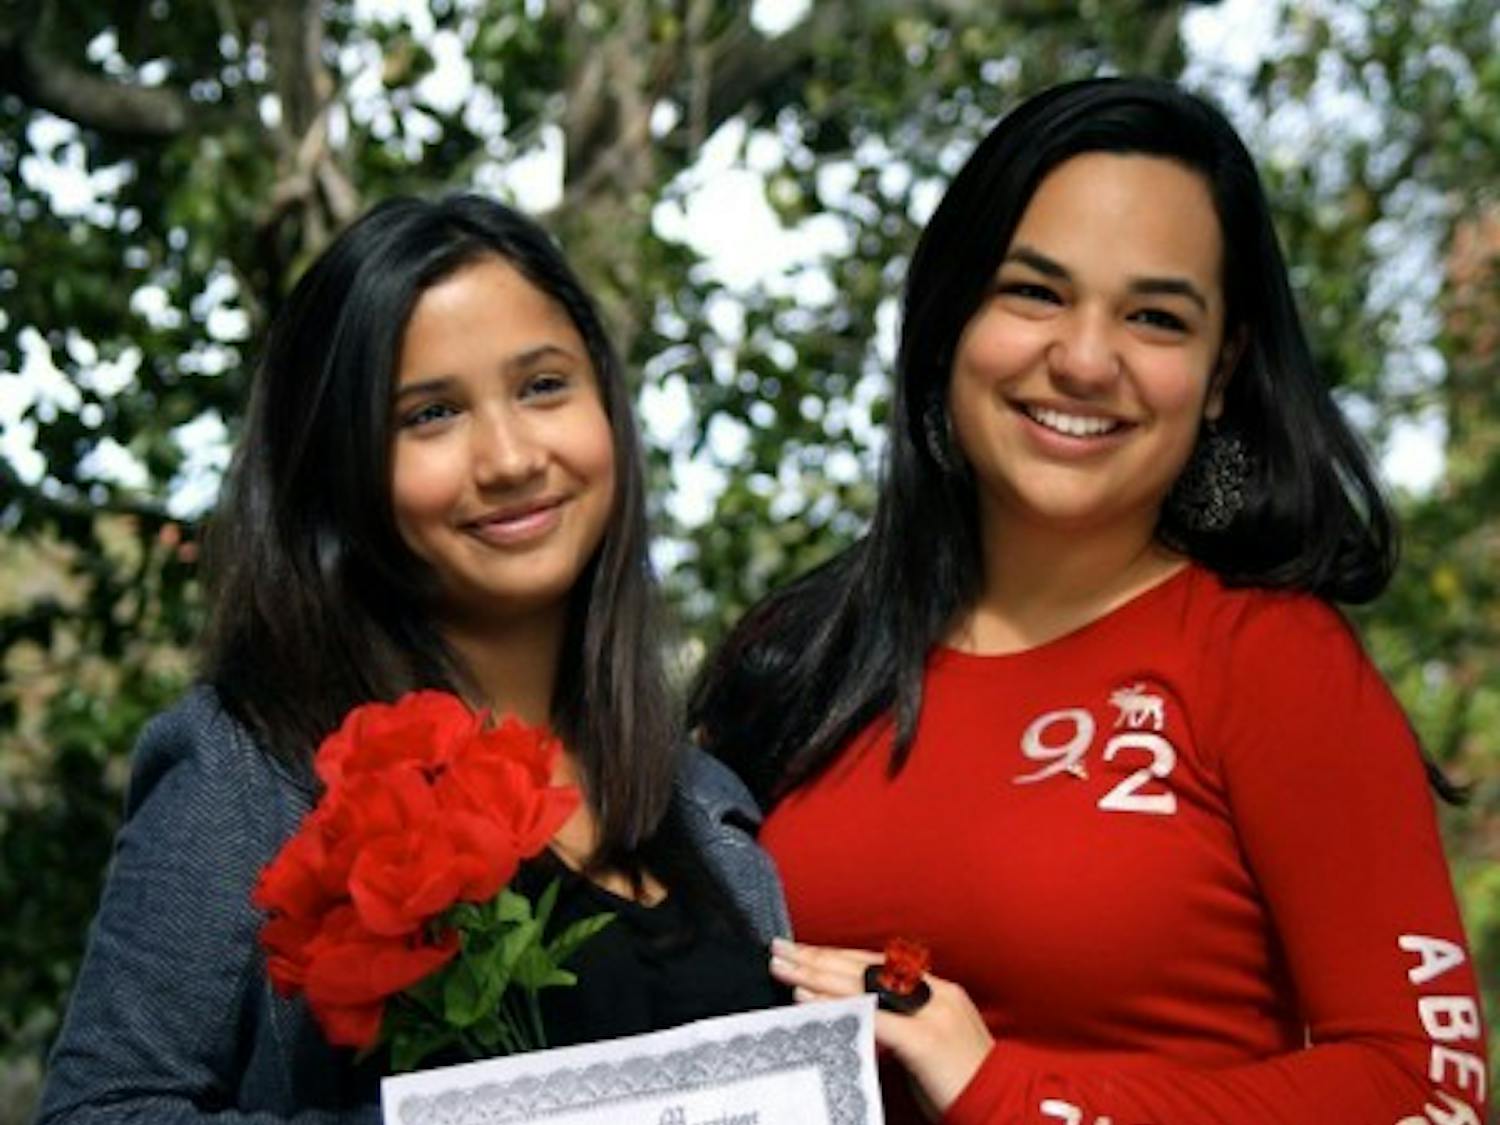 Biology freshman Daniela Sanchez and finance freshman Alejandra Miyares get married on the Plaza of the Americas on Tuesday afternoon. Delta Sigma Pi hosted the wedding ceremonies, complete with bridal bouquet, optional bow tie and Ring Pop exchange for a $3 donation to the American Cancer Society.